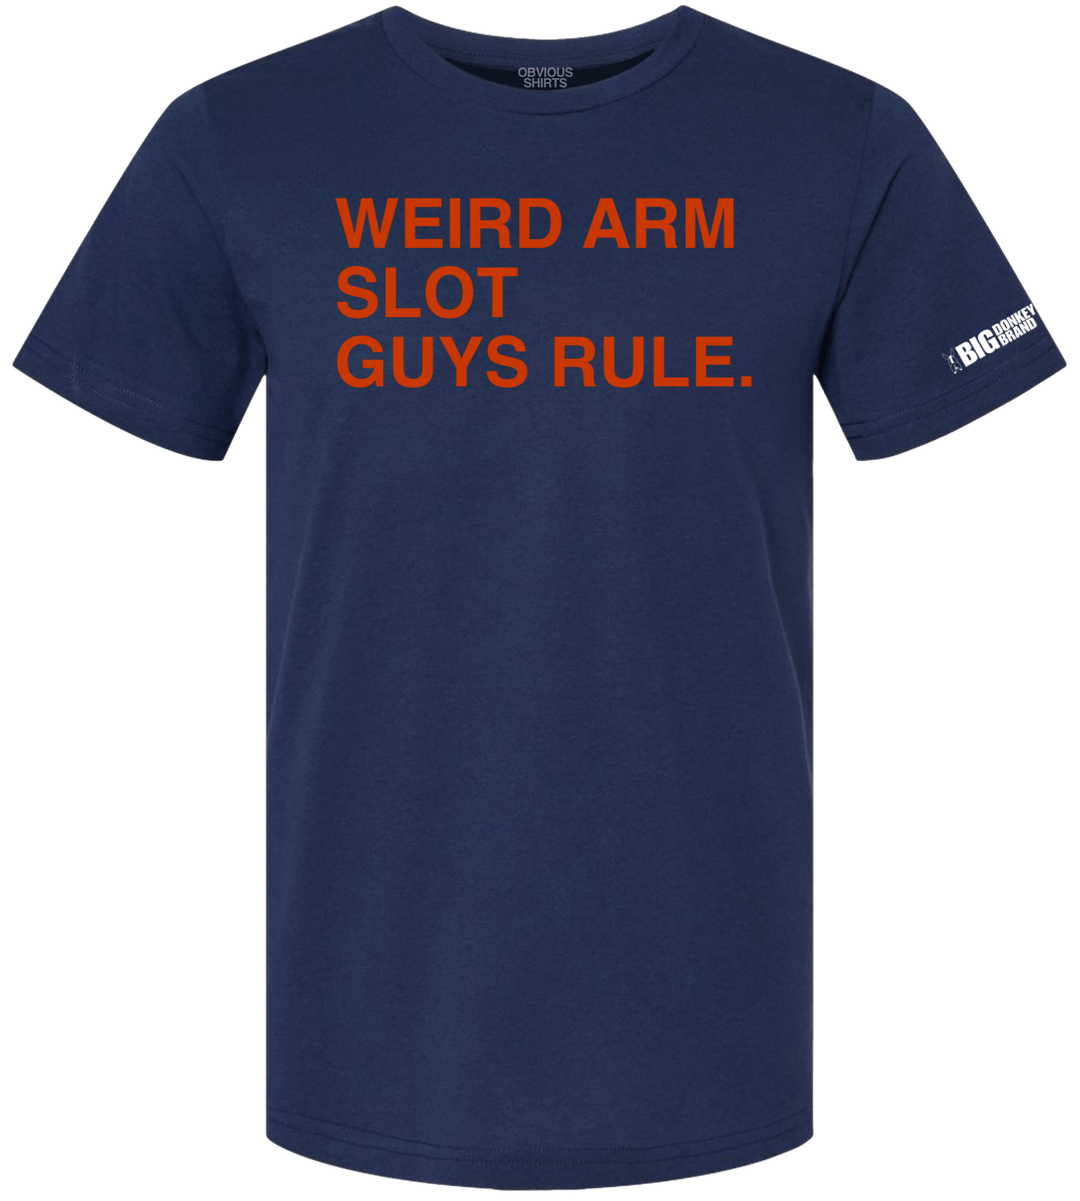 WEIRD ARM SLOT GUYS RULE. (CUSTOMIZE) - OBVIOUS SHIRTS